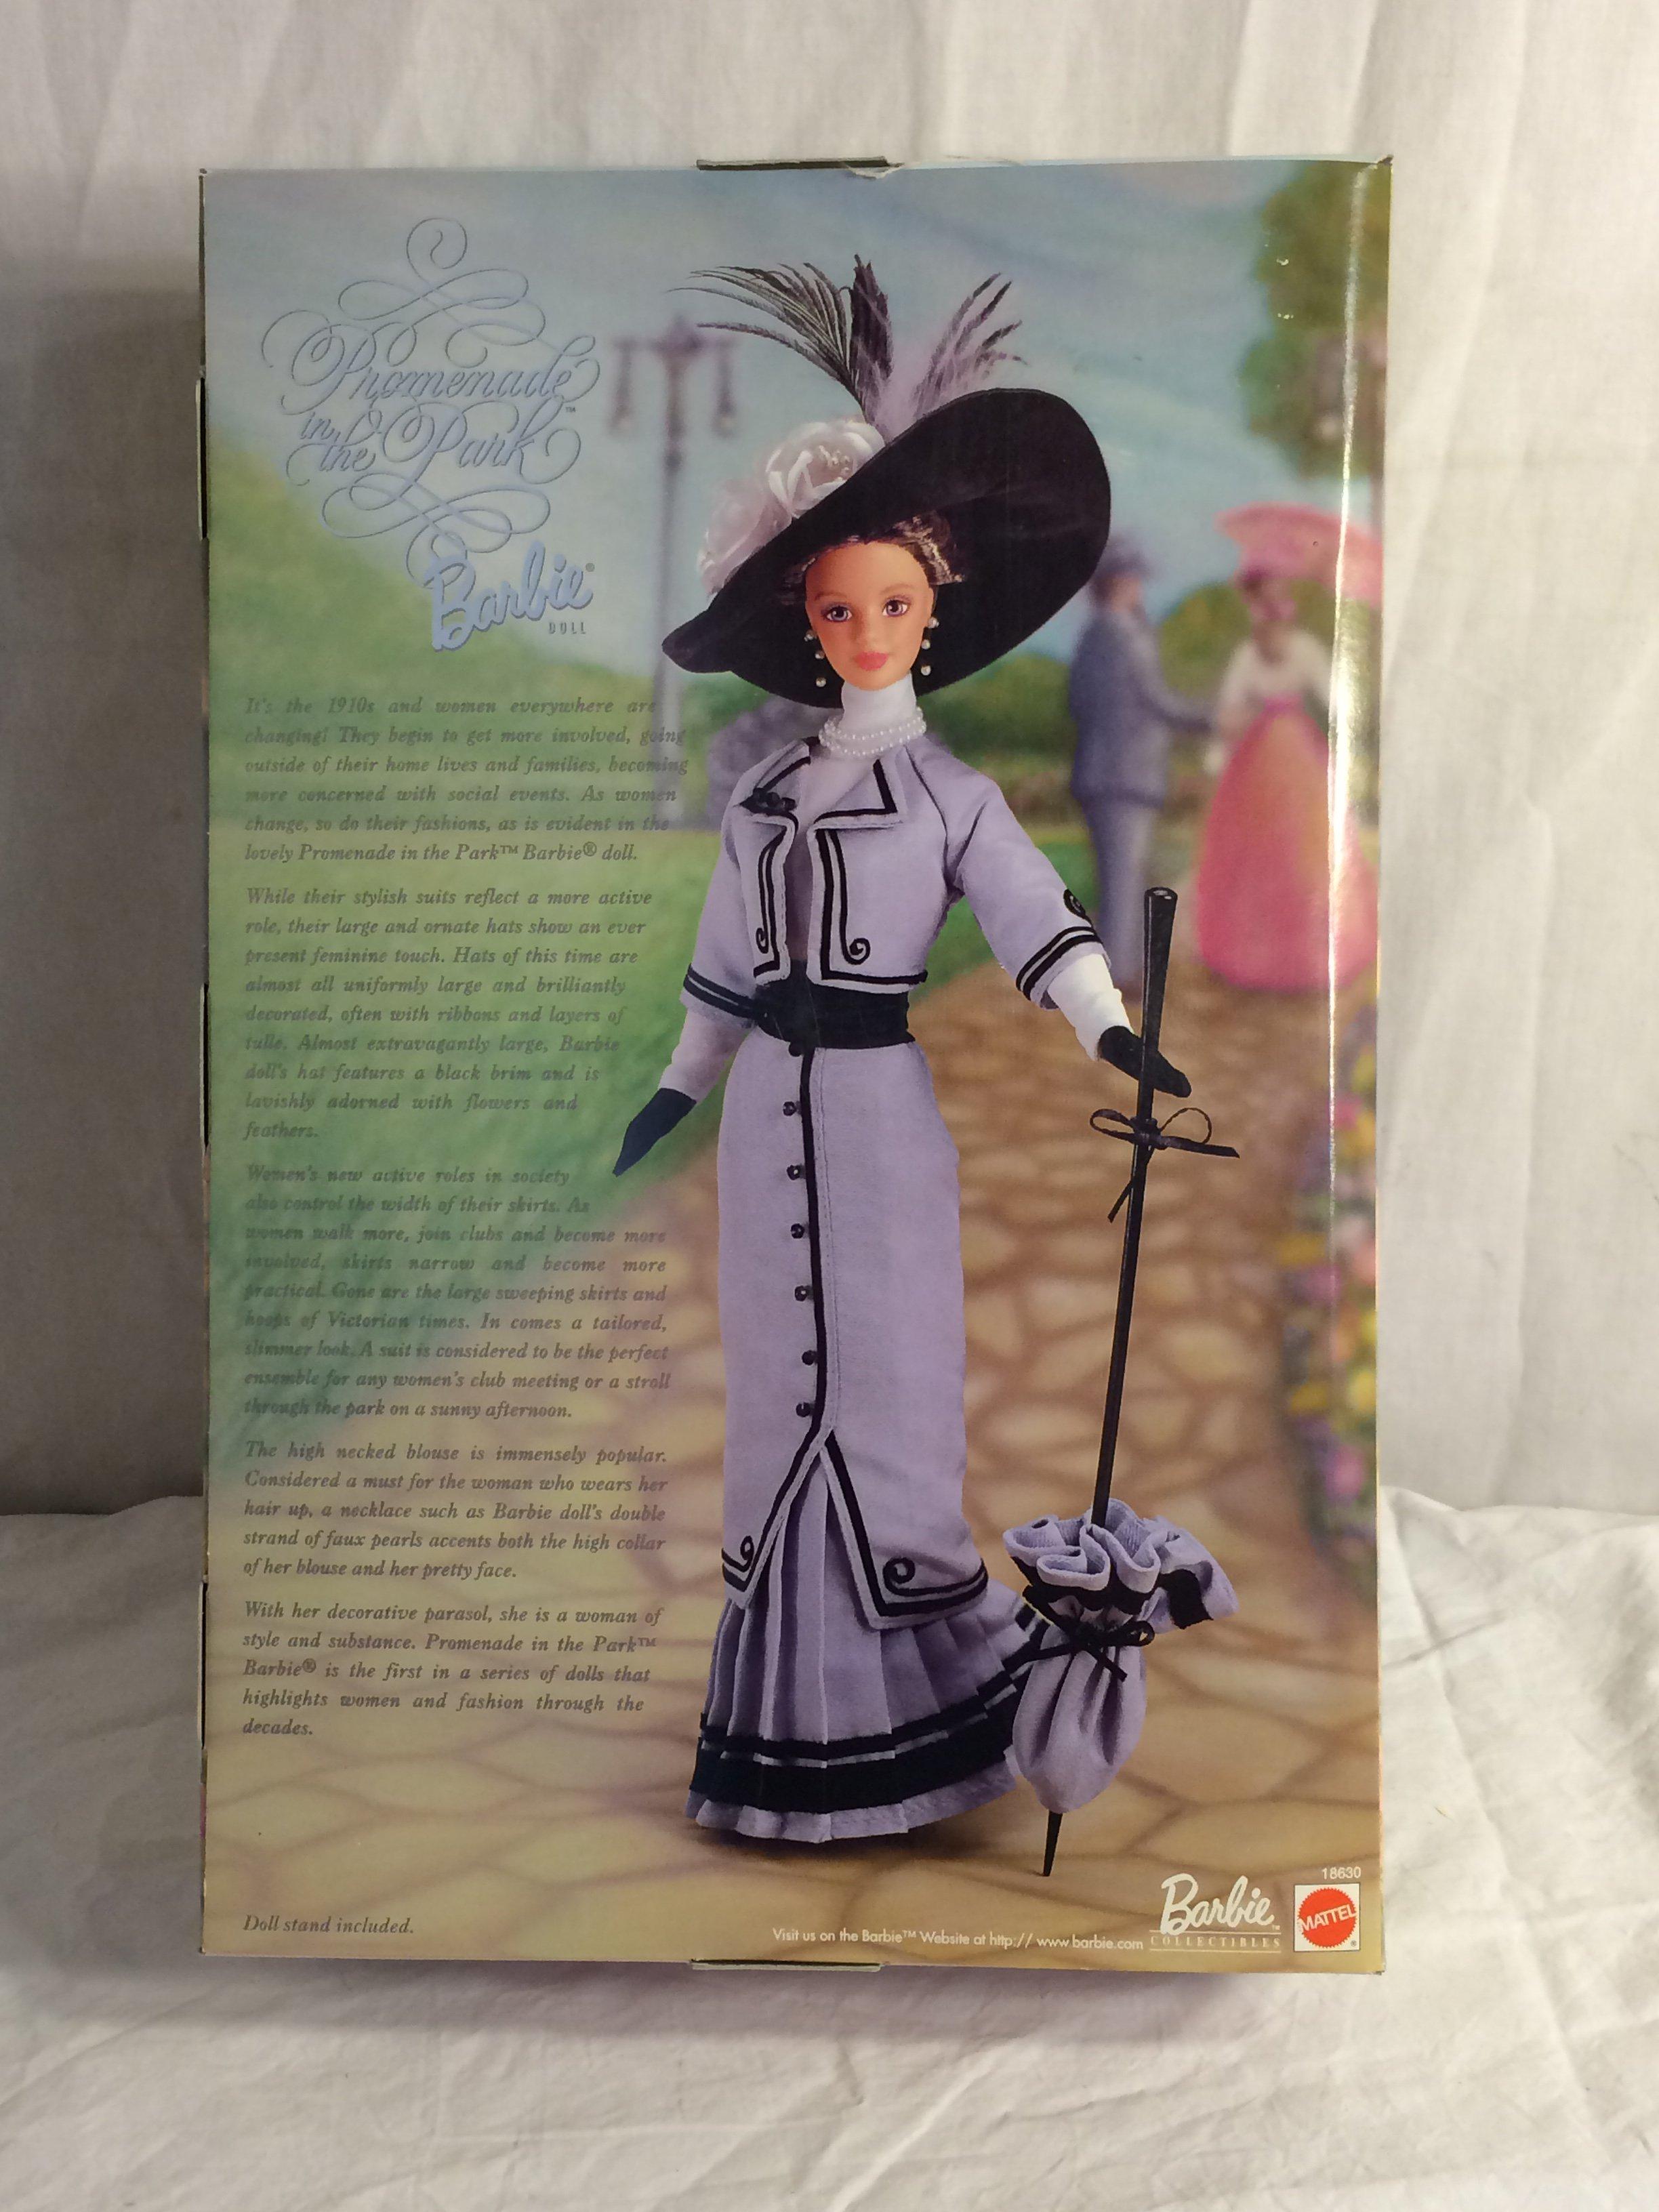 Collector Mattel Barbie Doll Promenade In The Park 13.5" Tall By 9"Width Box Size